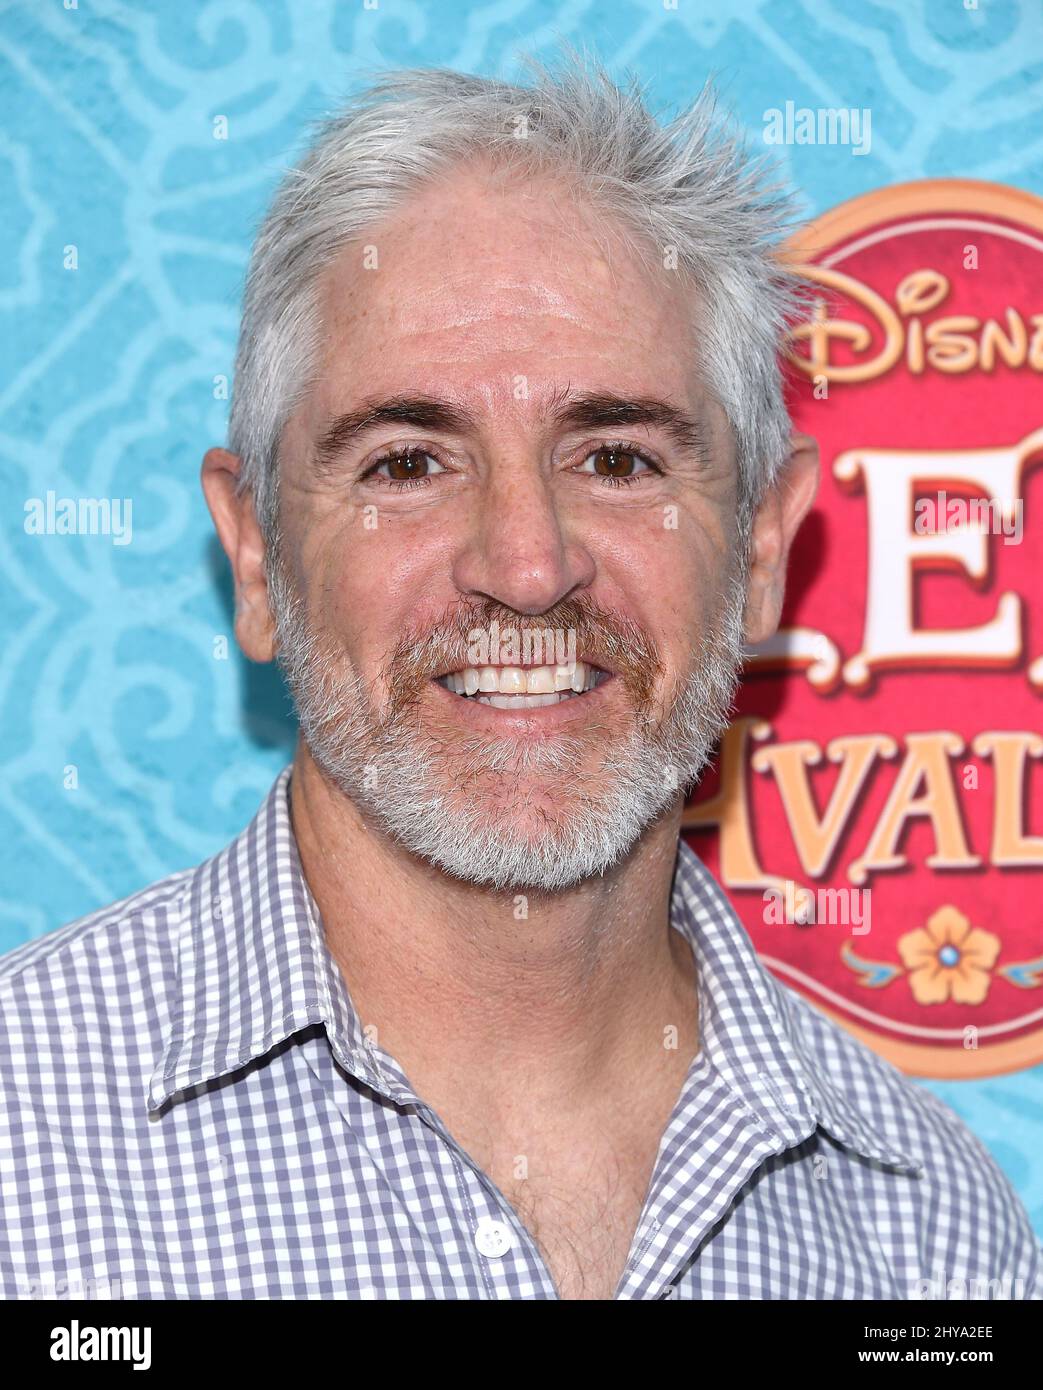 Carlos Alazraqui attending the premiere of Elena of Avalor at the Paley Center for Media in Los Angeles, California. Stock Photo